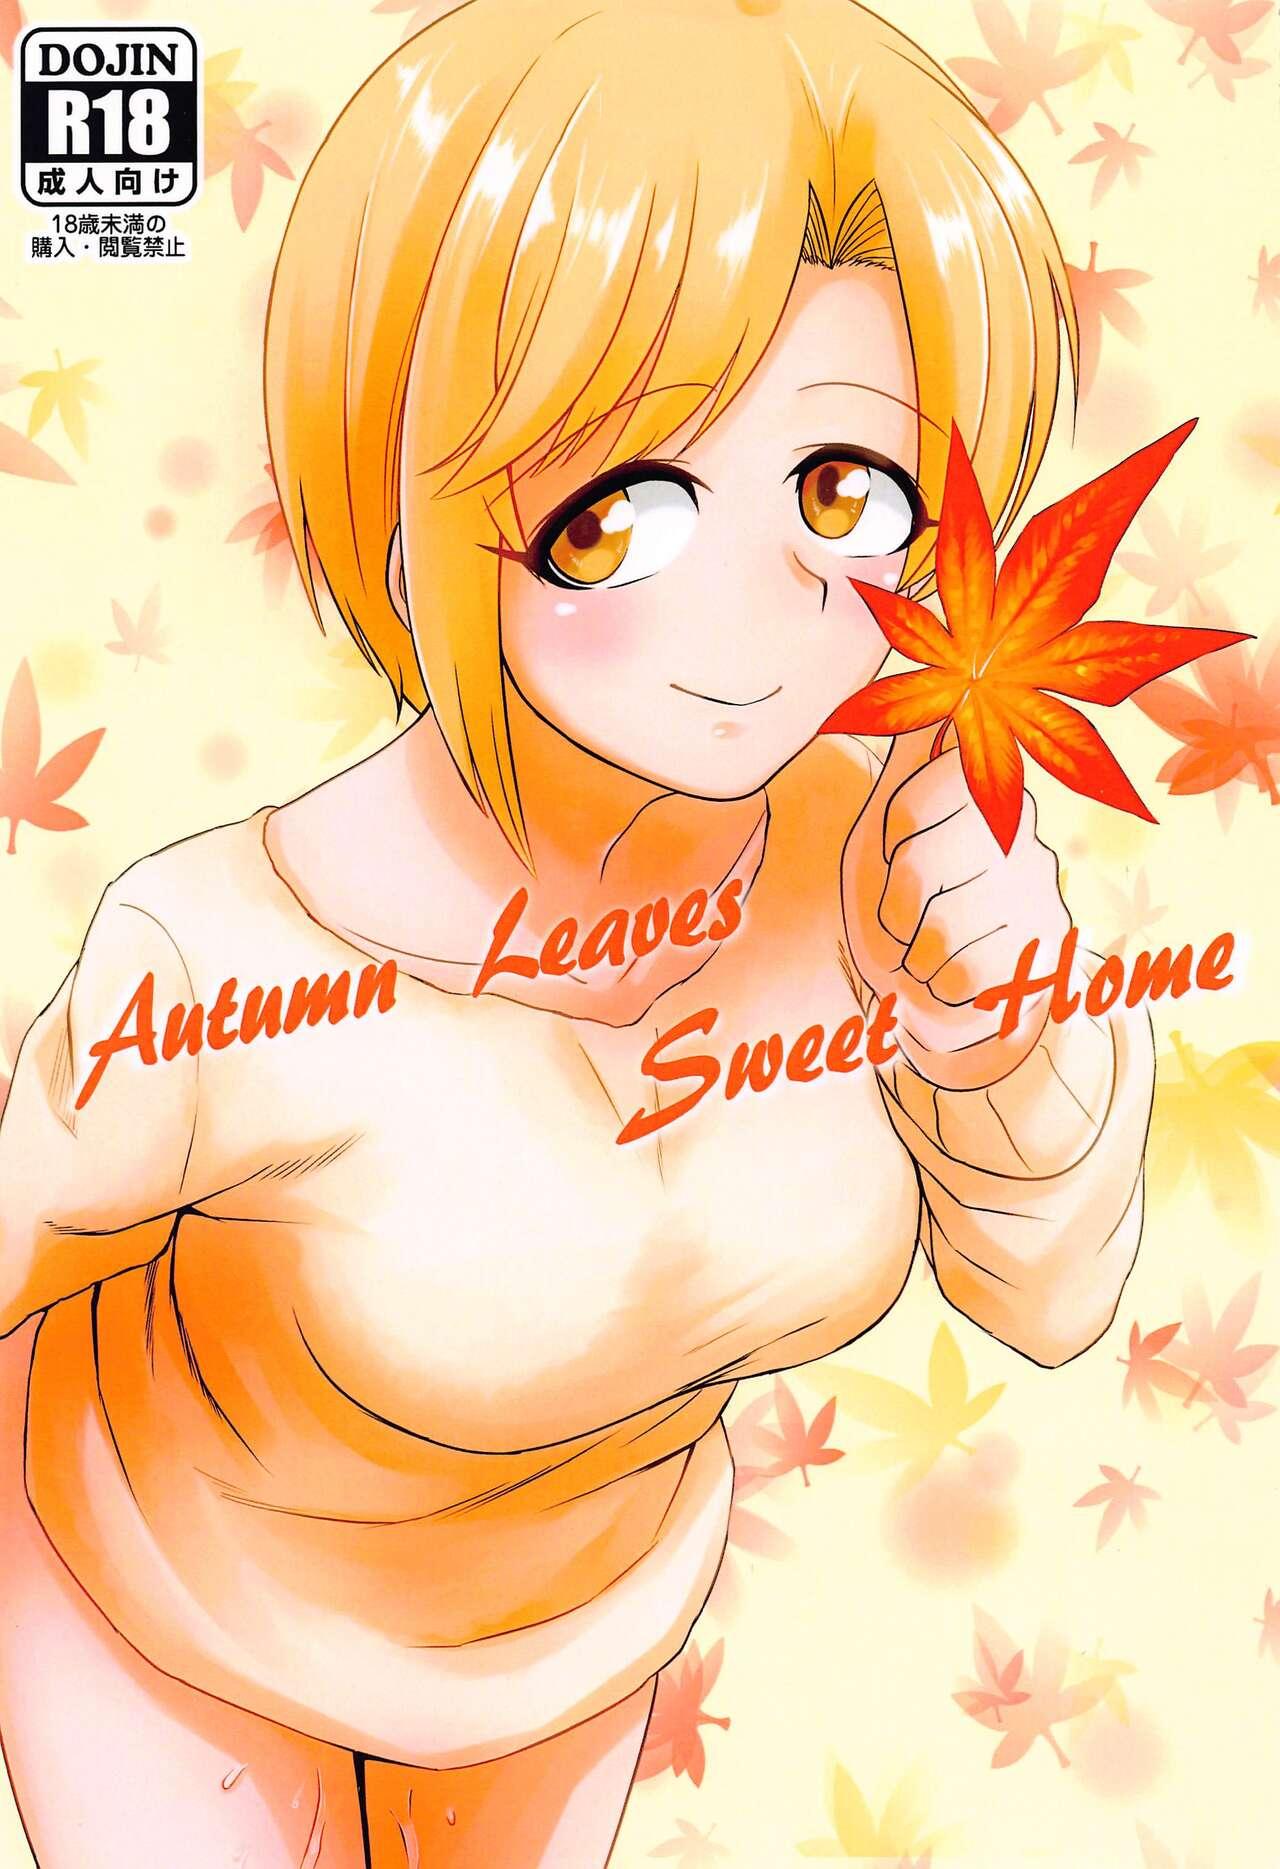 Teenxxx Autumn Leaves Sweet Home - The idolmaster Brother - Picture 1